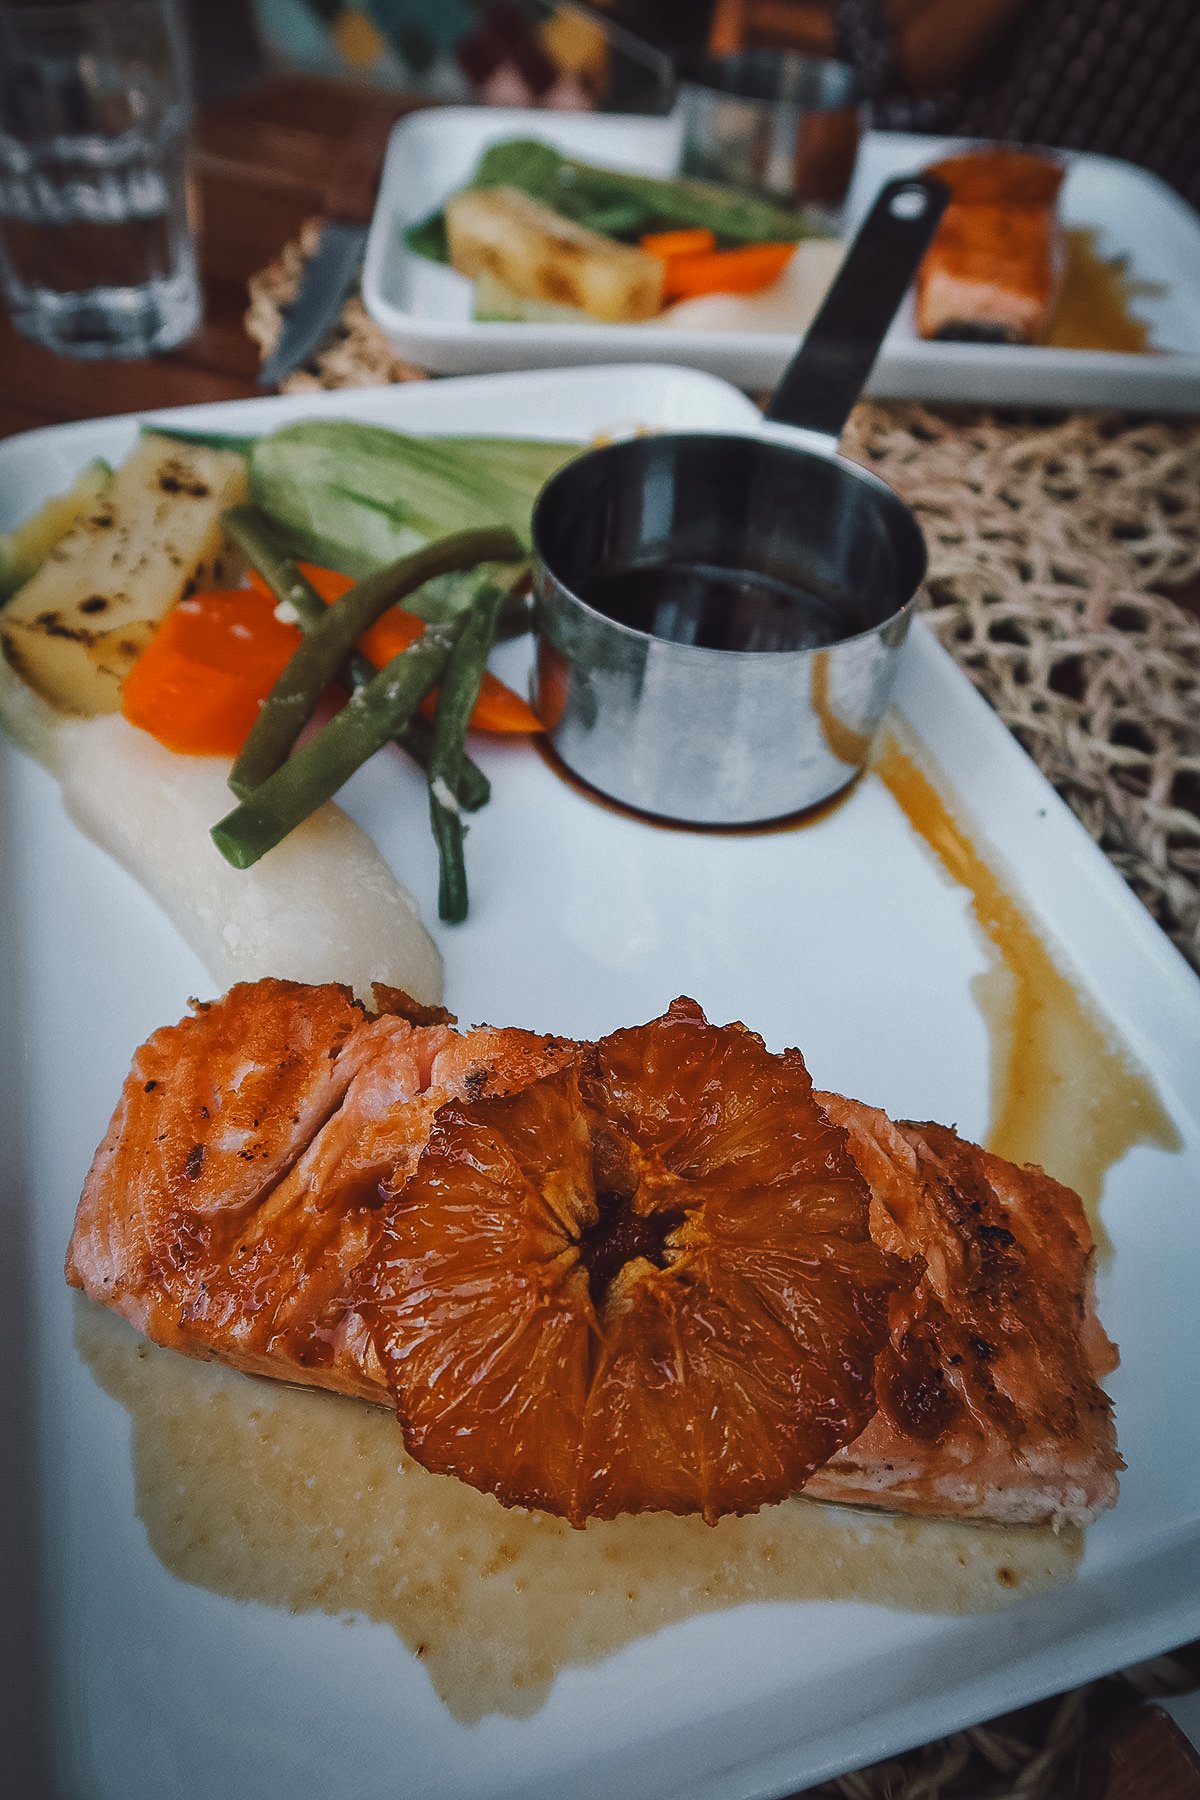 Grilled salmon at a restaurant in Fez